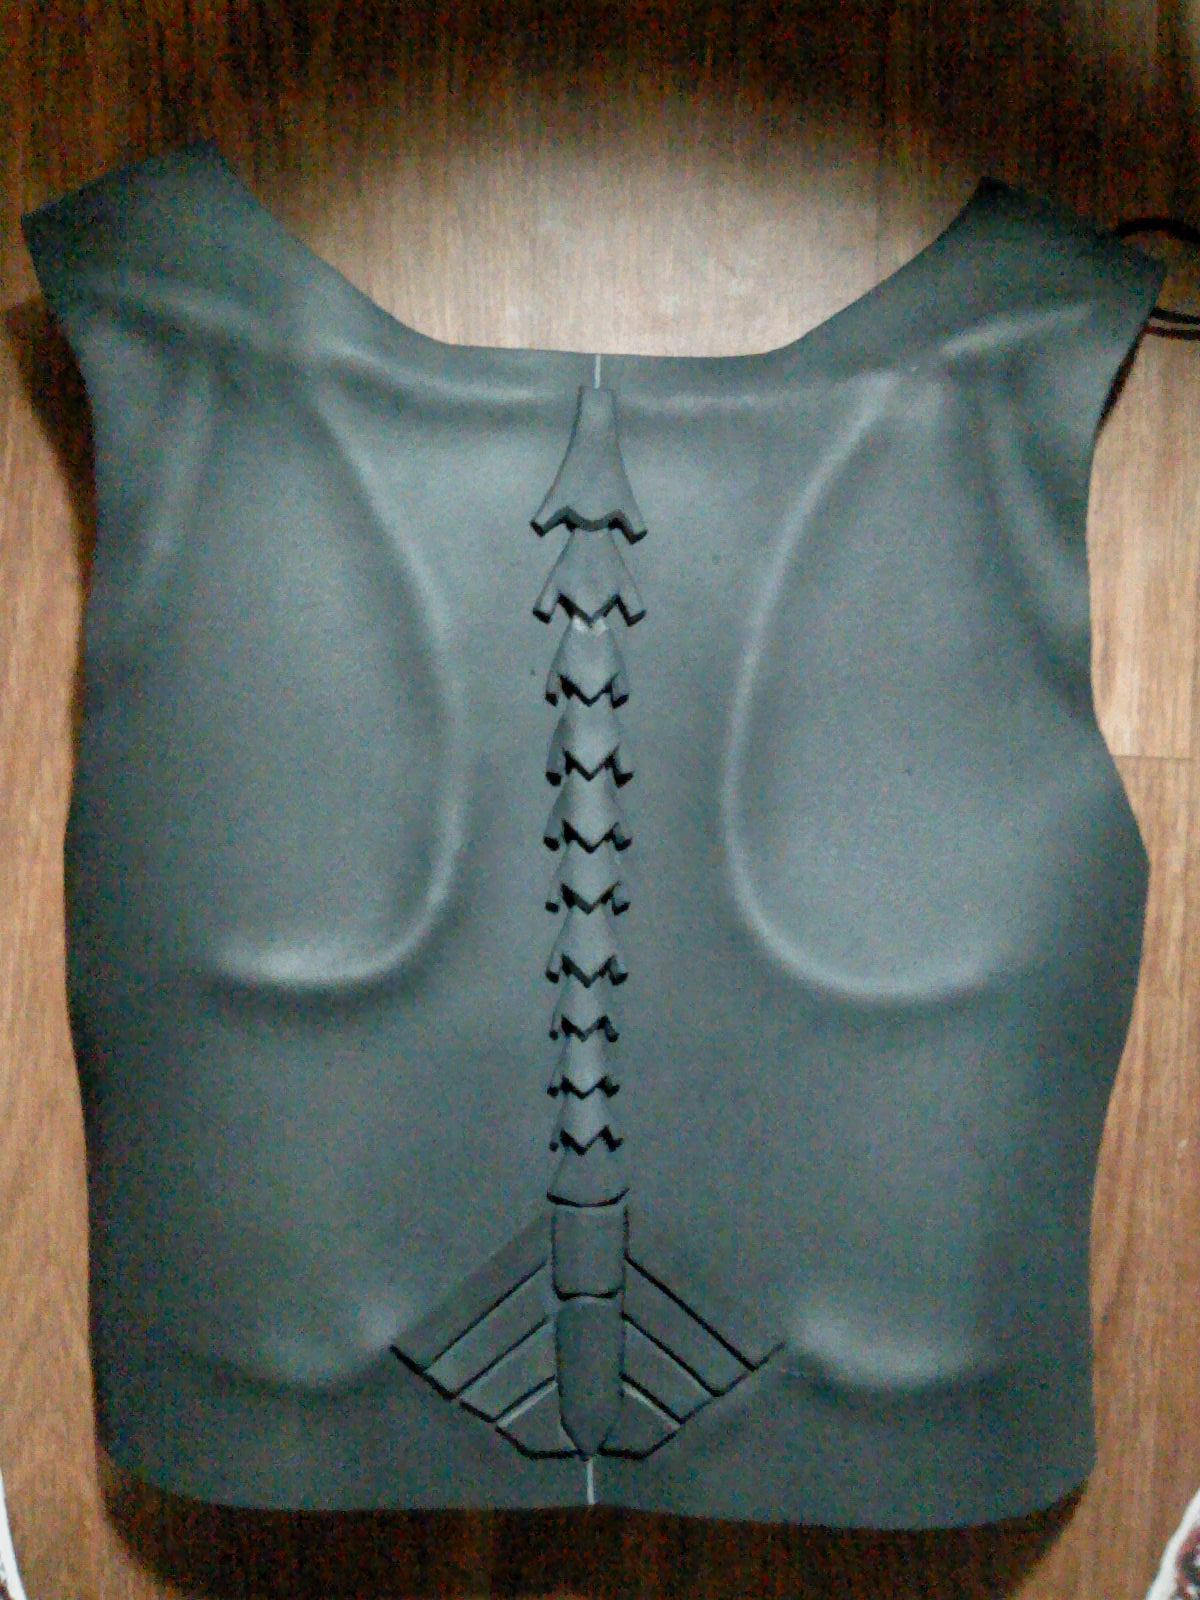 Back of the armor